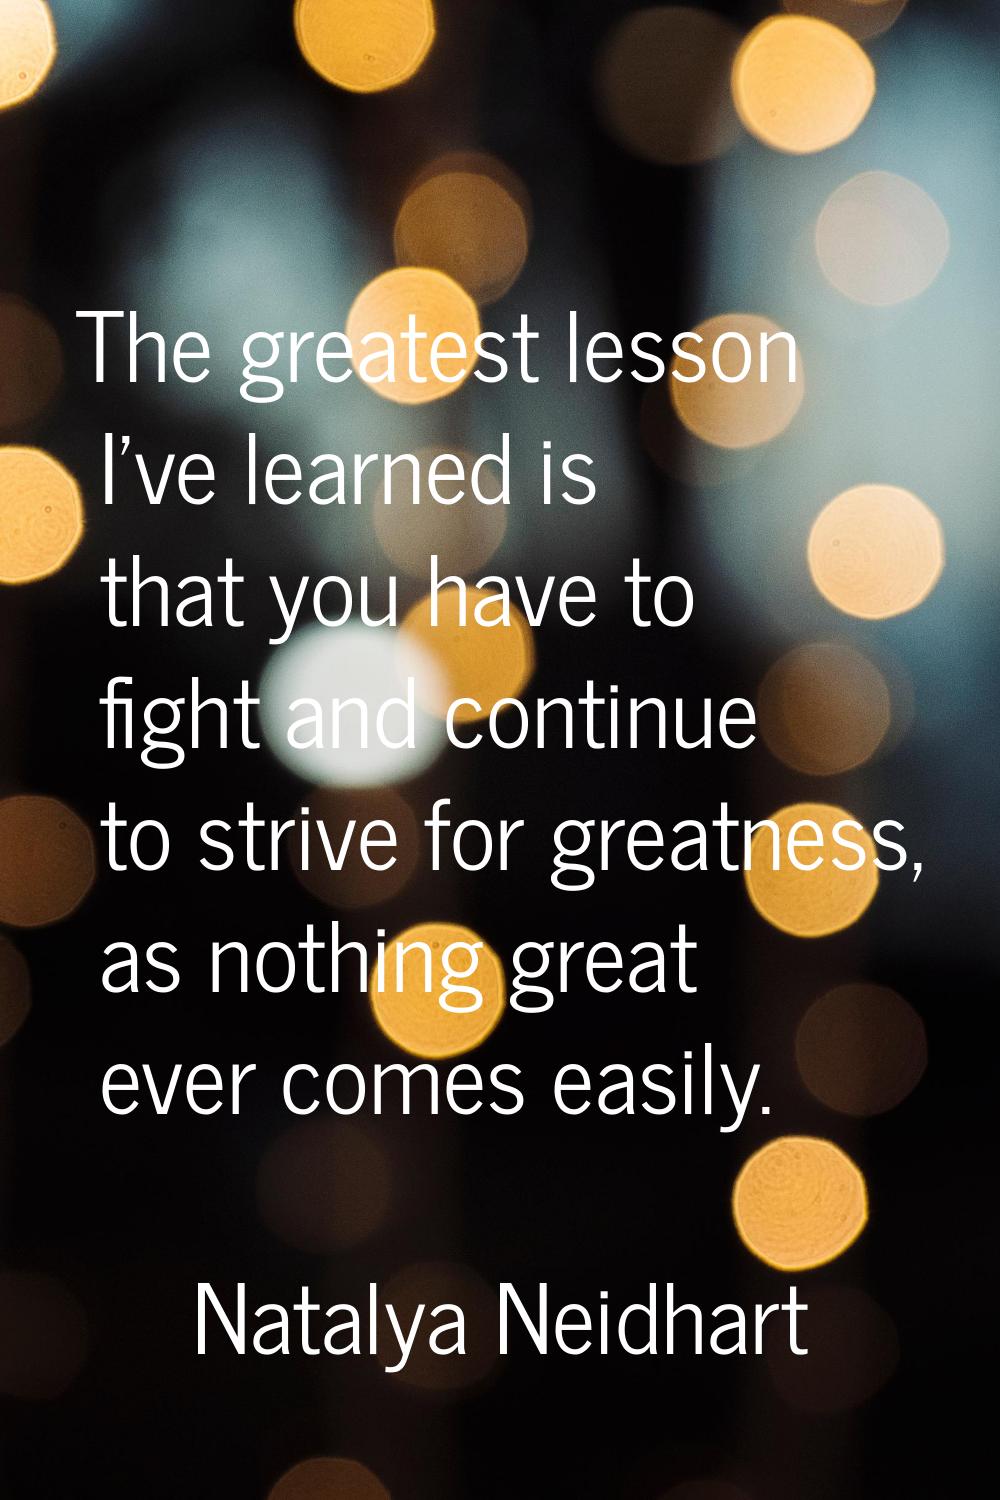 The greatest lesson I've learned is that you have to fight and continue to strive for greatness, as